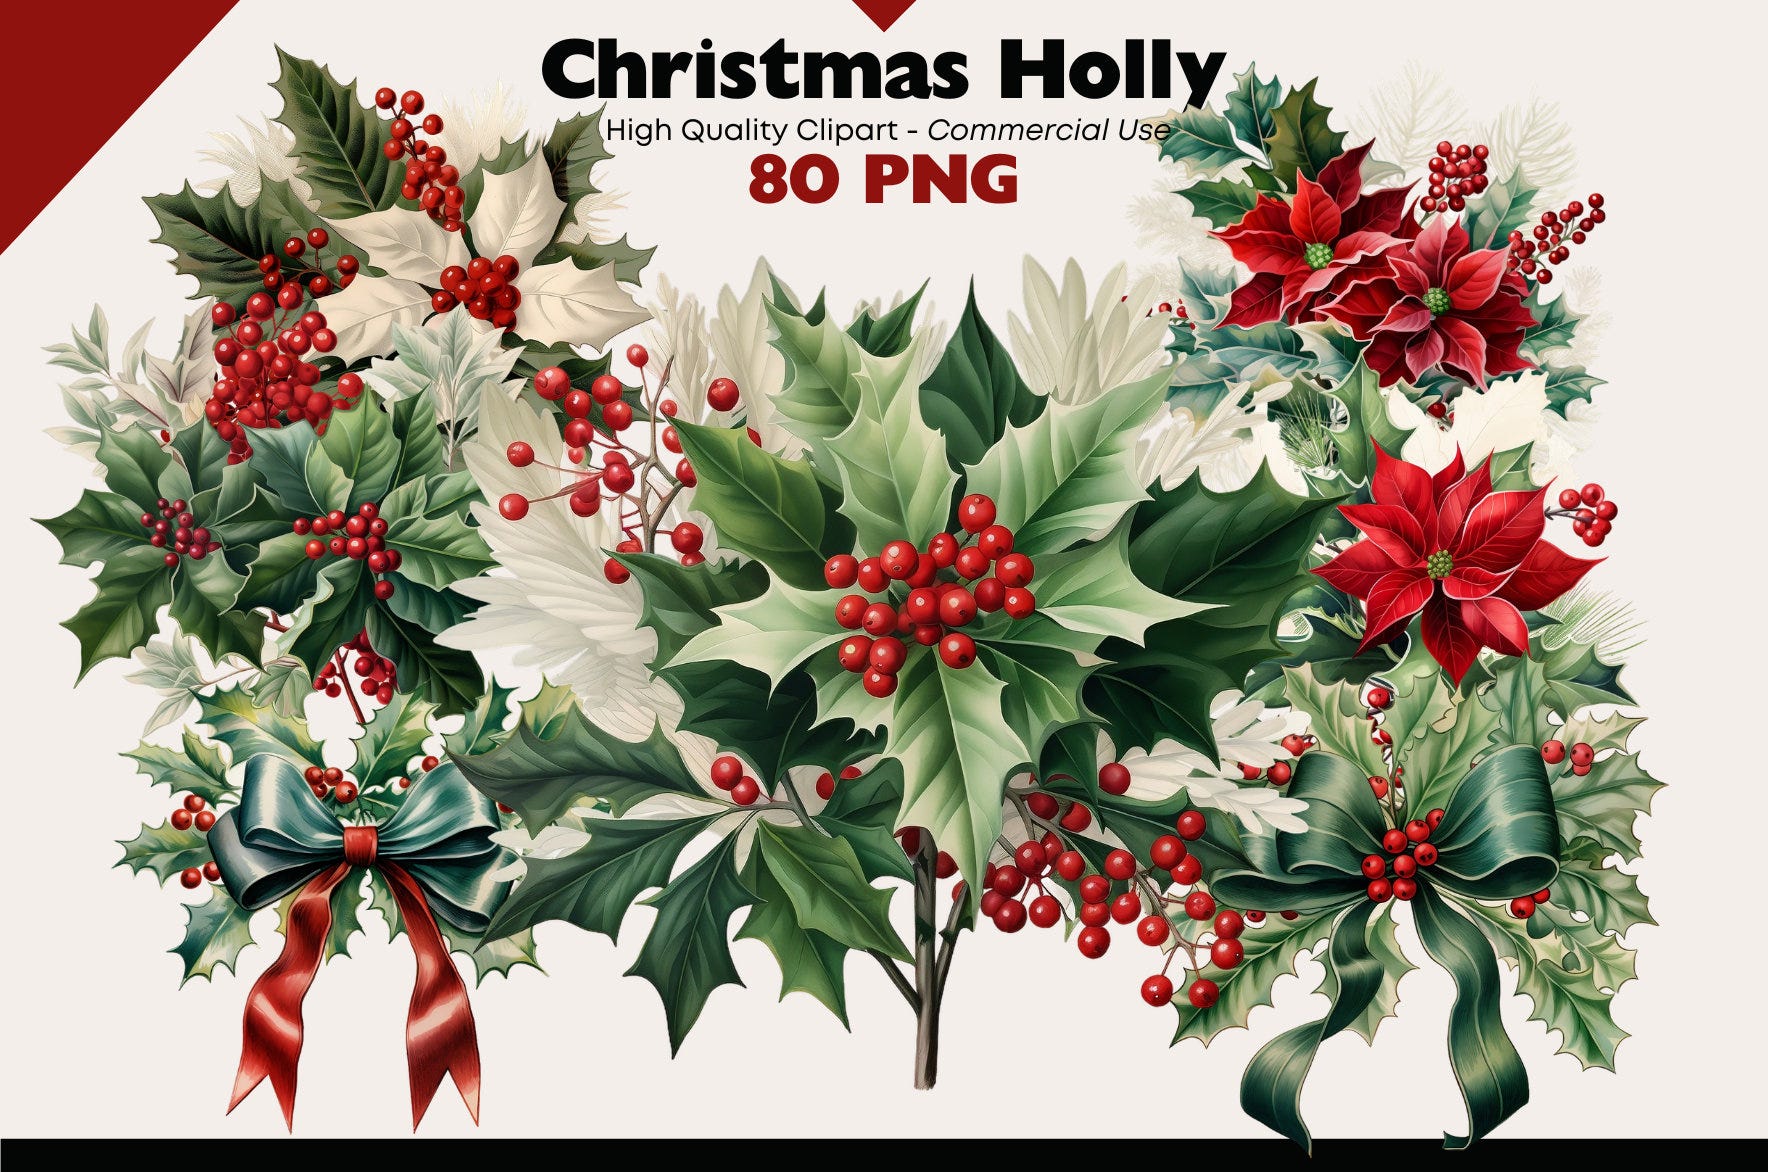 Christmas Holly Clipart, Holly PNG bundle, Poinsettia and Holly Graphics, Winter Holly Wreath Clip art Illustrations, Christmas Flowers PNG